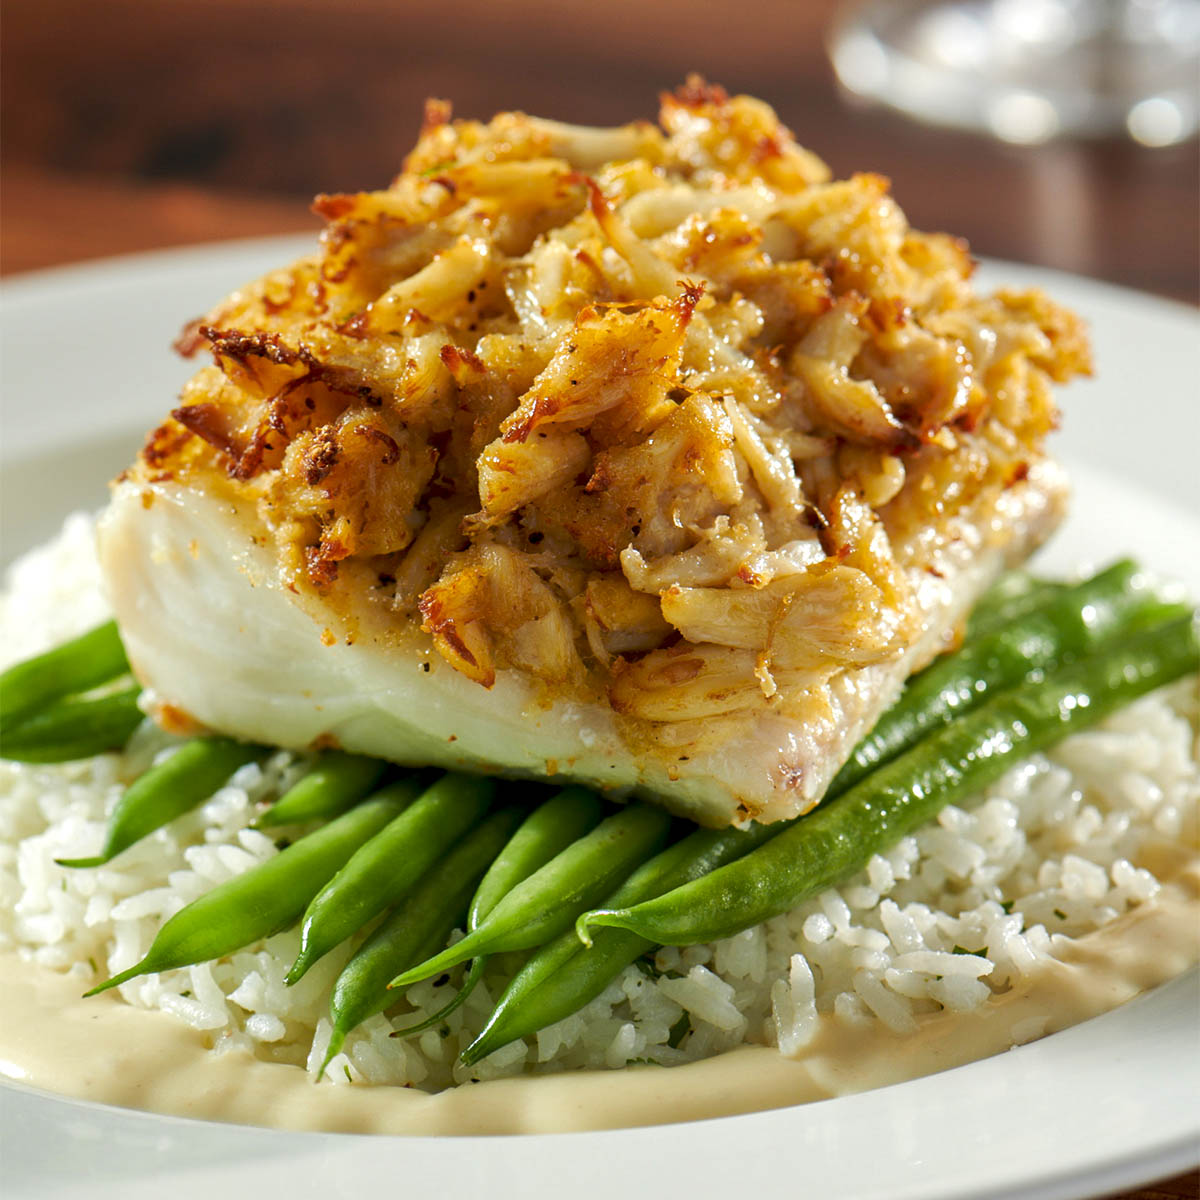 Burtons crab crusted haddock atop fresh green beans and fluffy rice at Framingham location